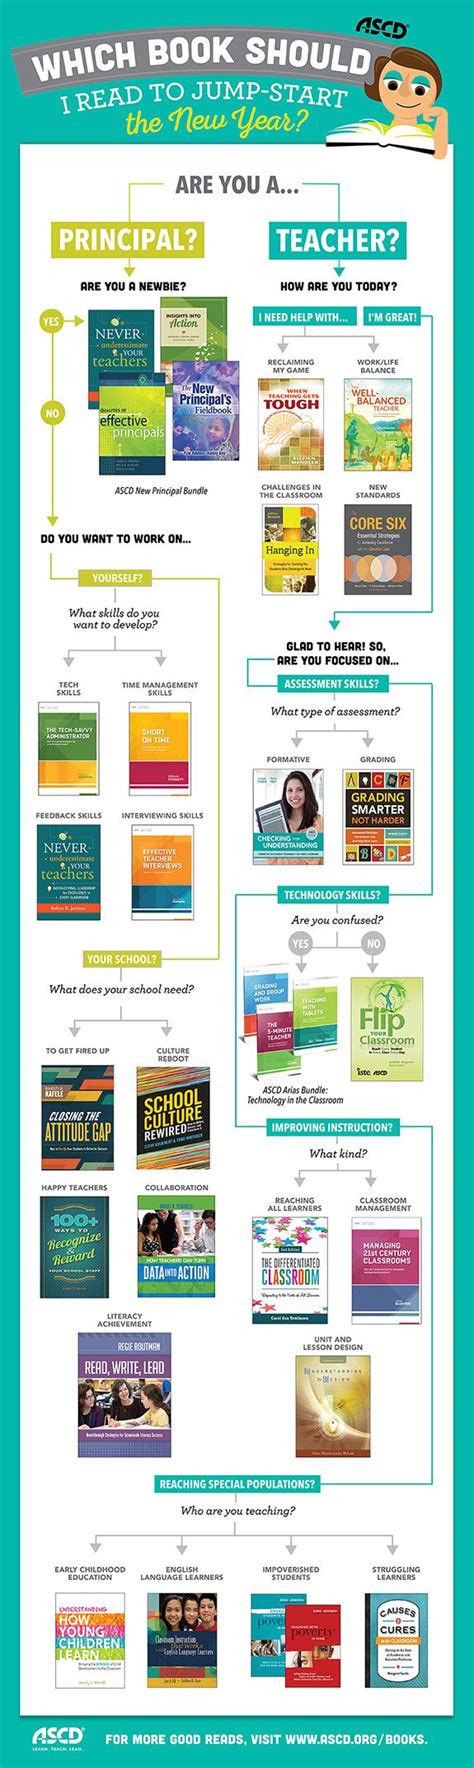 The Useful Books For Teachers Infographic Helps Educators Determine